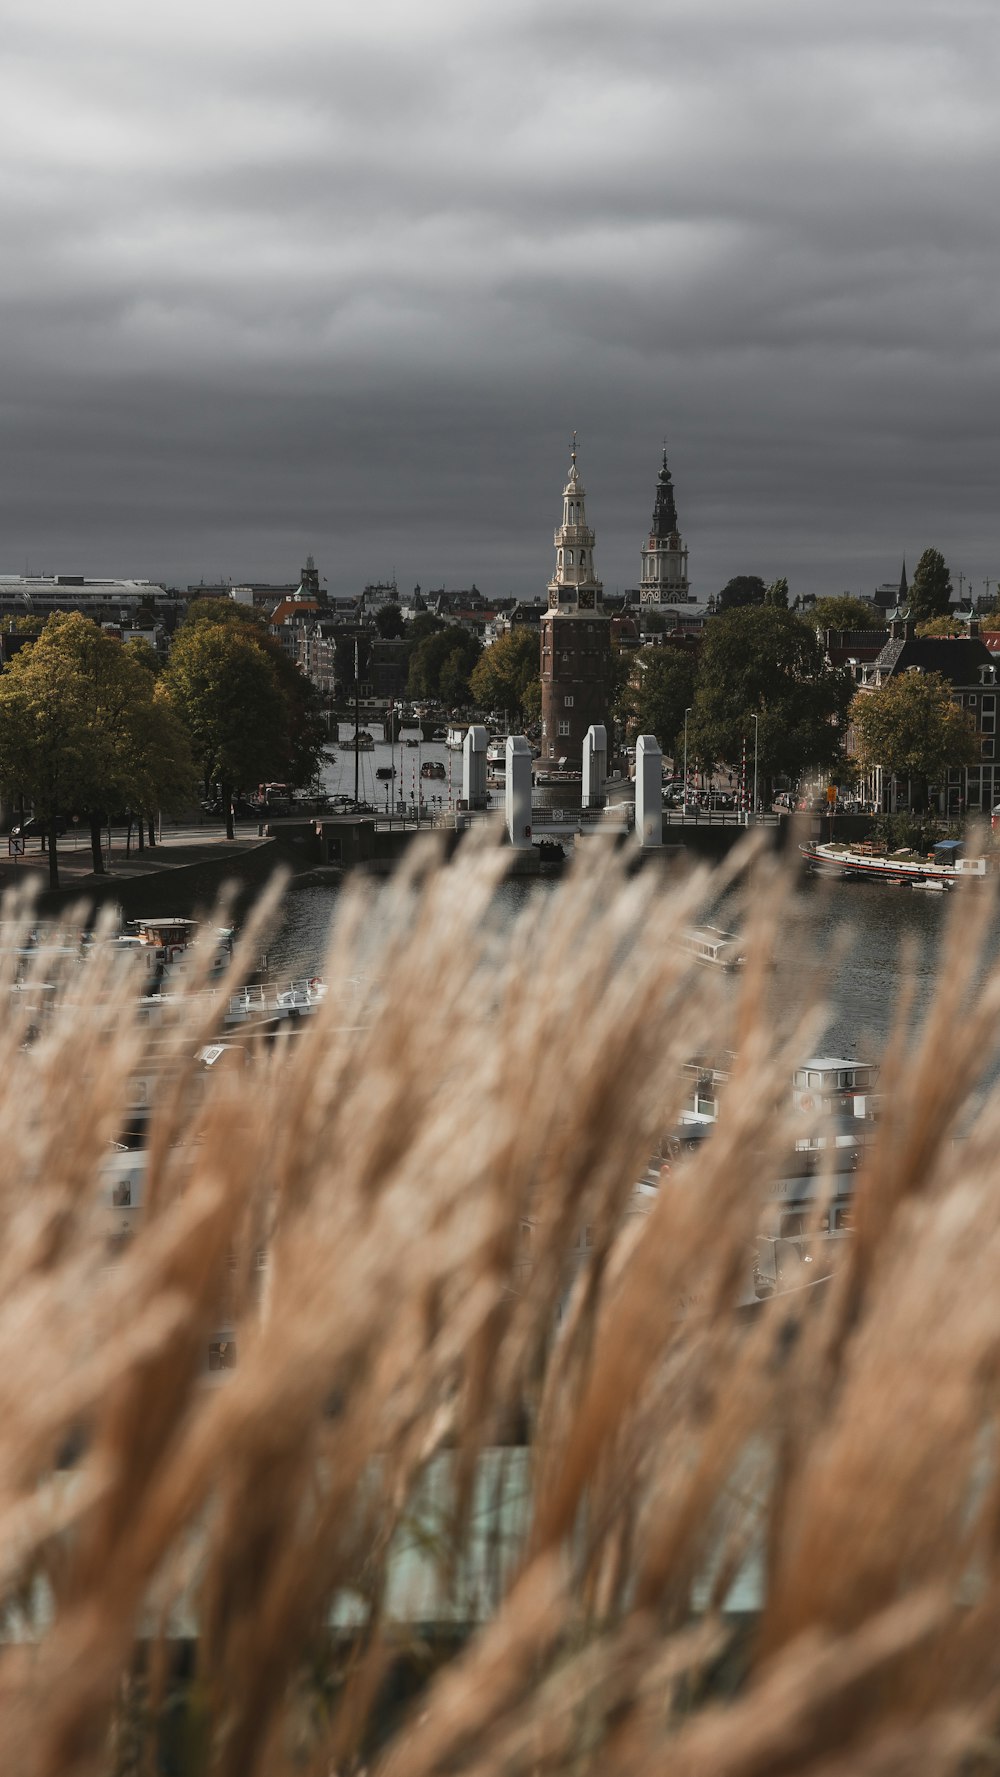 tall grass in front of a body of water with a clock tower in the background